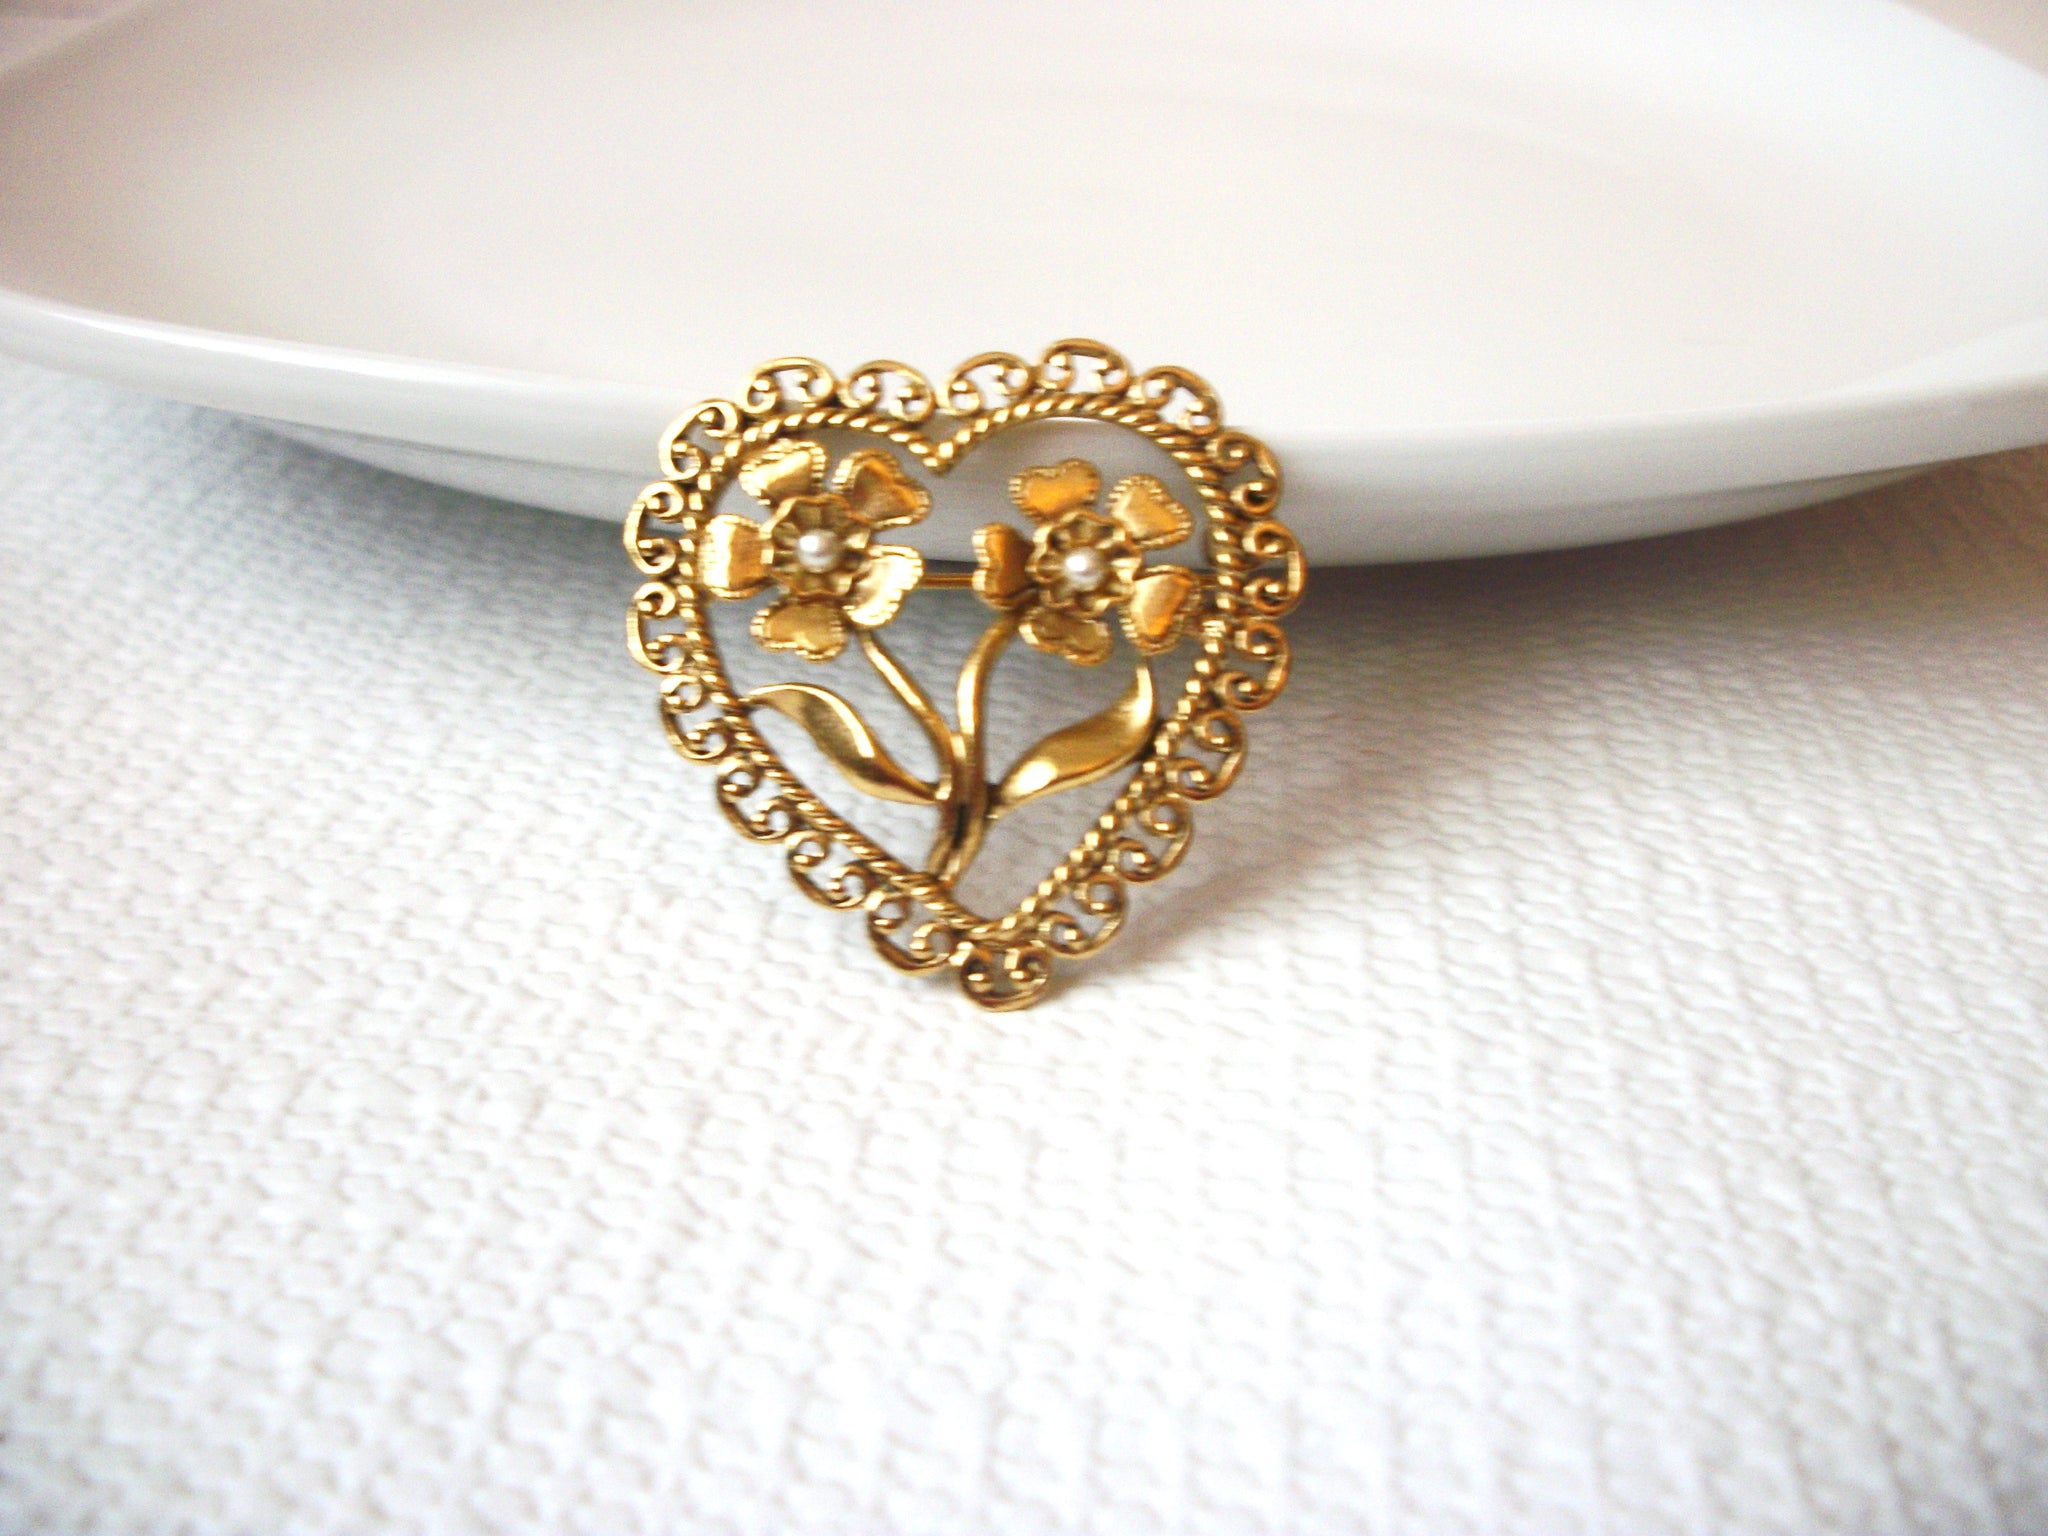 Vintage Damask Gold Toned Brooch, Faux Pearl Heart Brooch Pin 113016